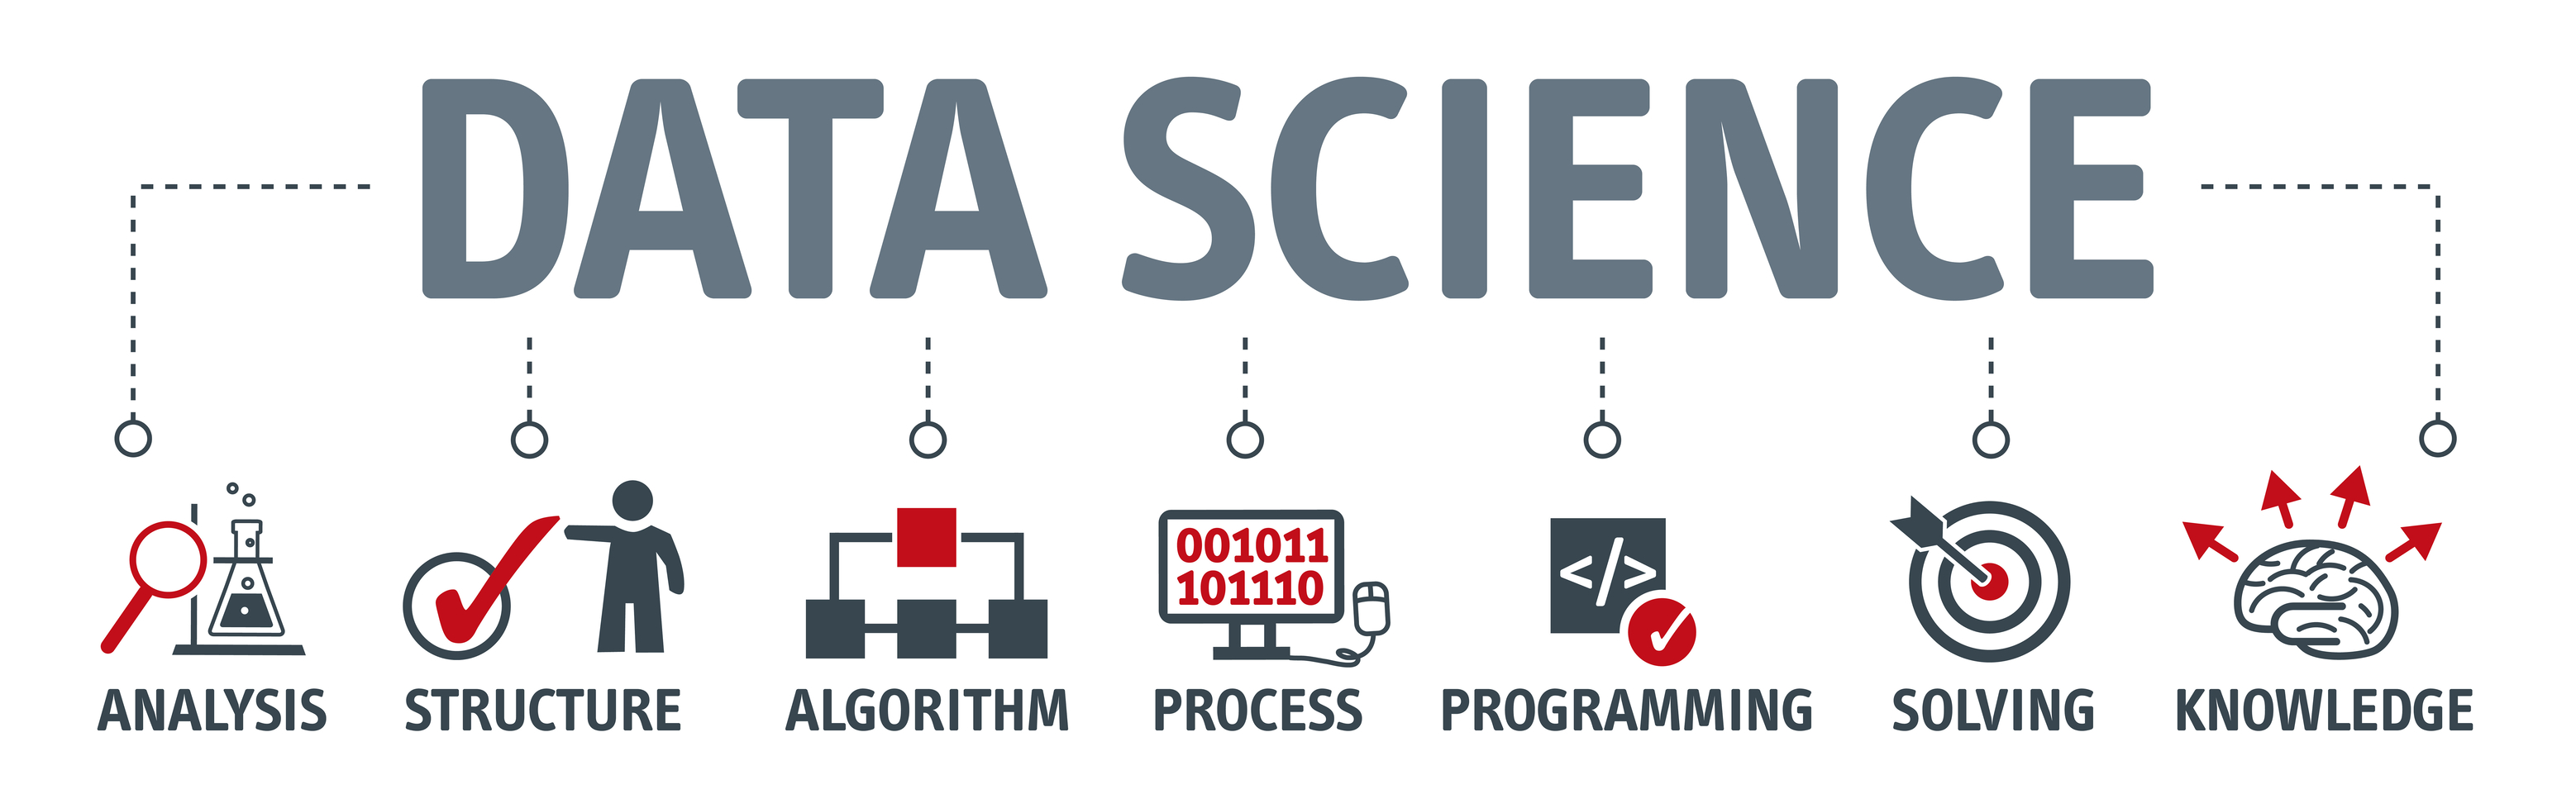 Data Science and How Data Scientists Add Value to Business - Big Data  Analytics News